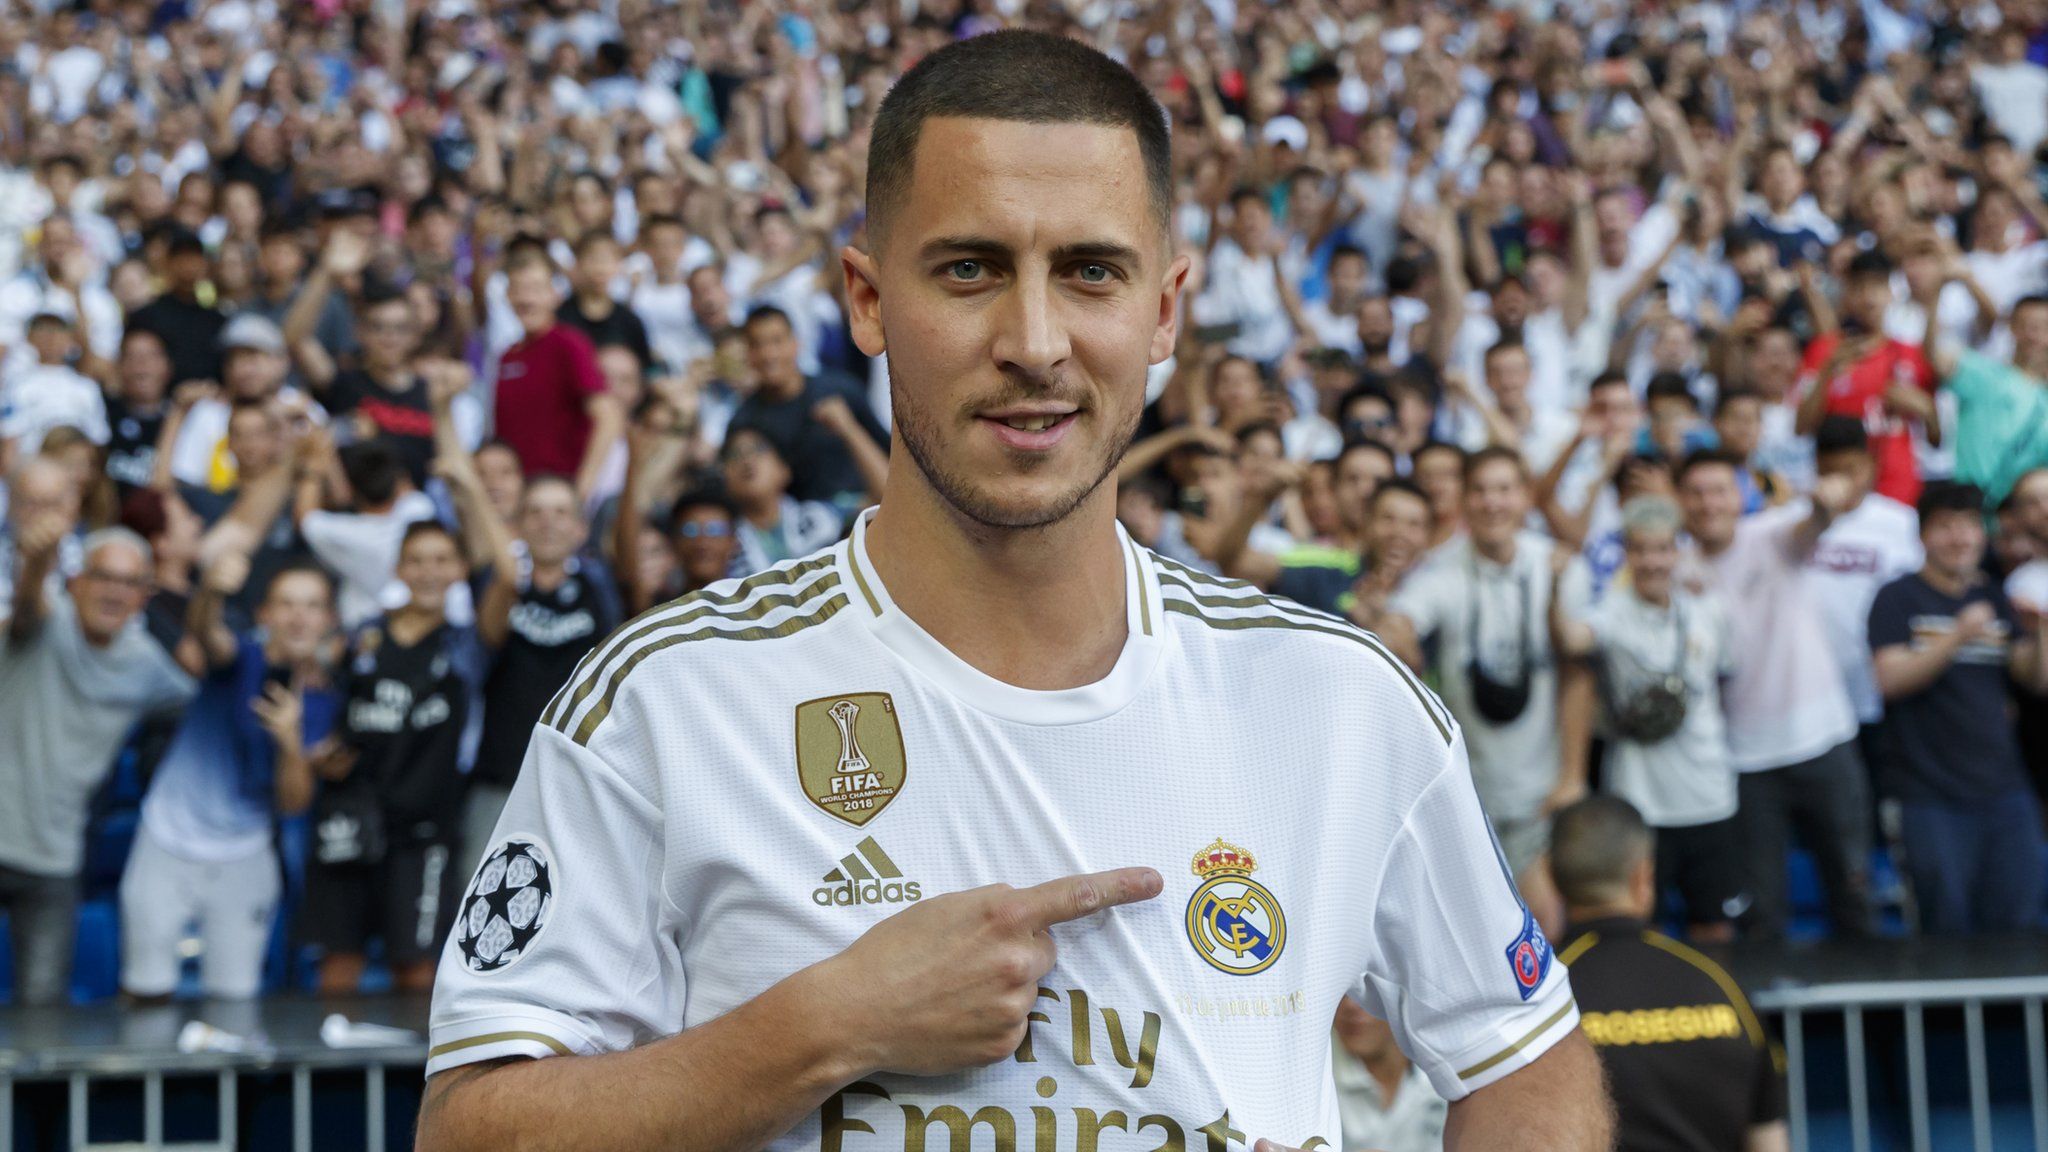 Eden Hazard points at the Real Madrid badge on his shirt following his unveiling at the Bernabeu in June